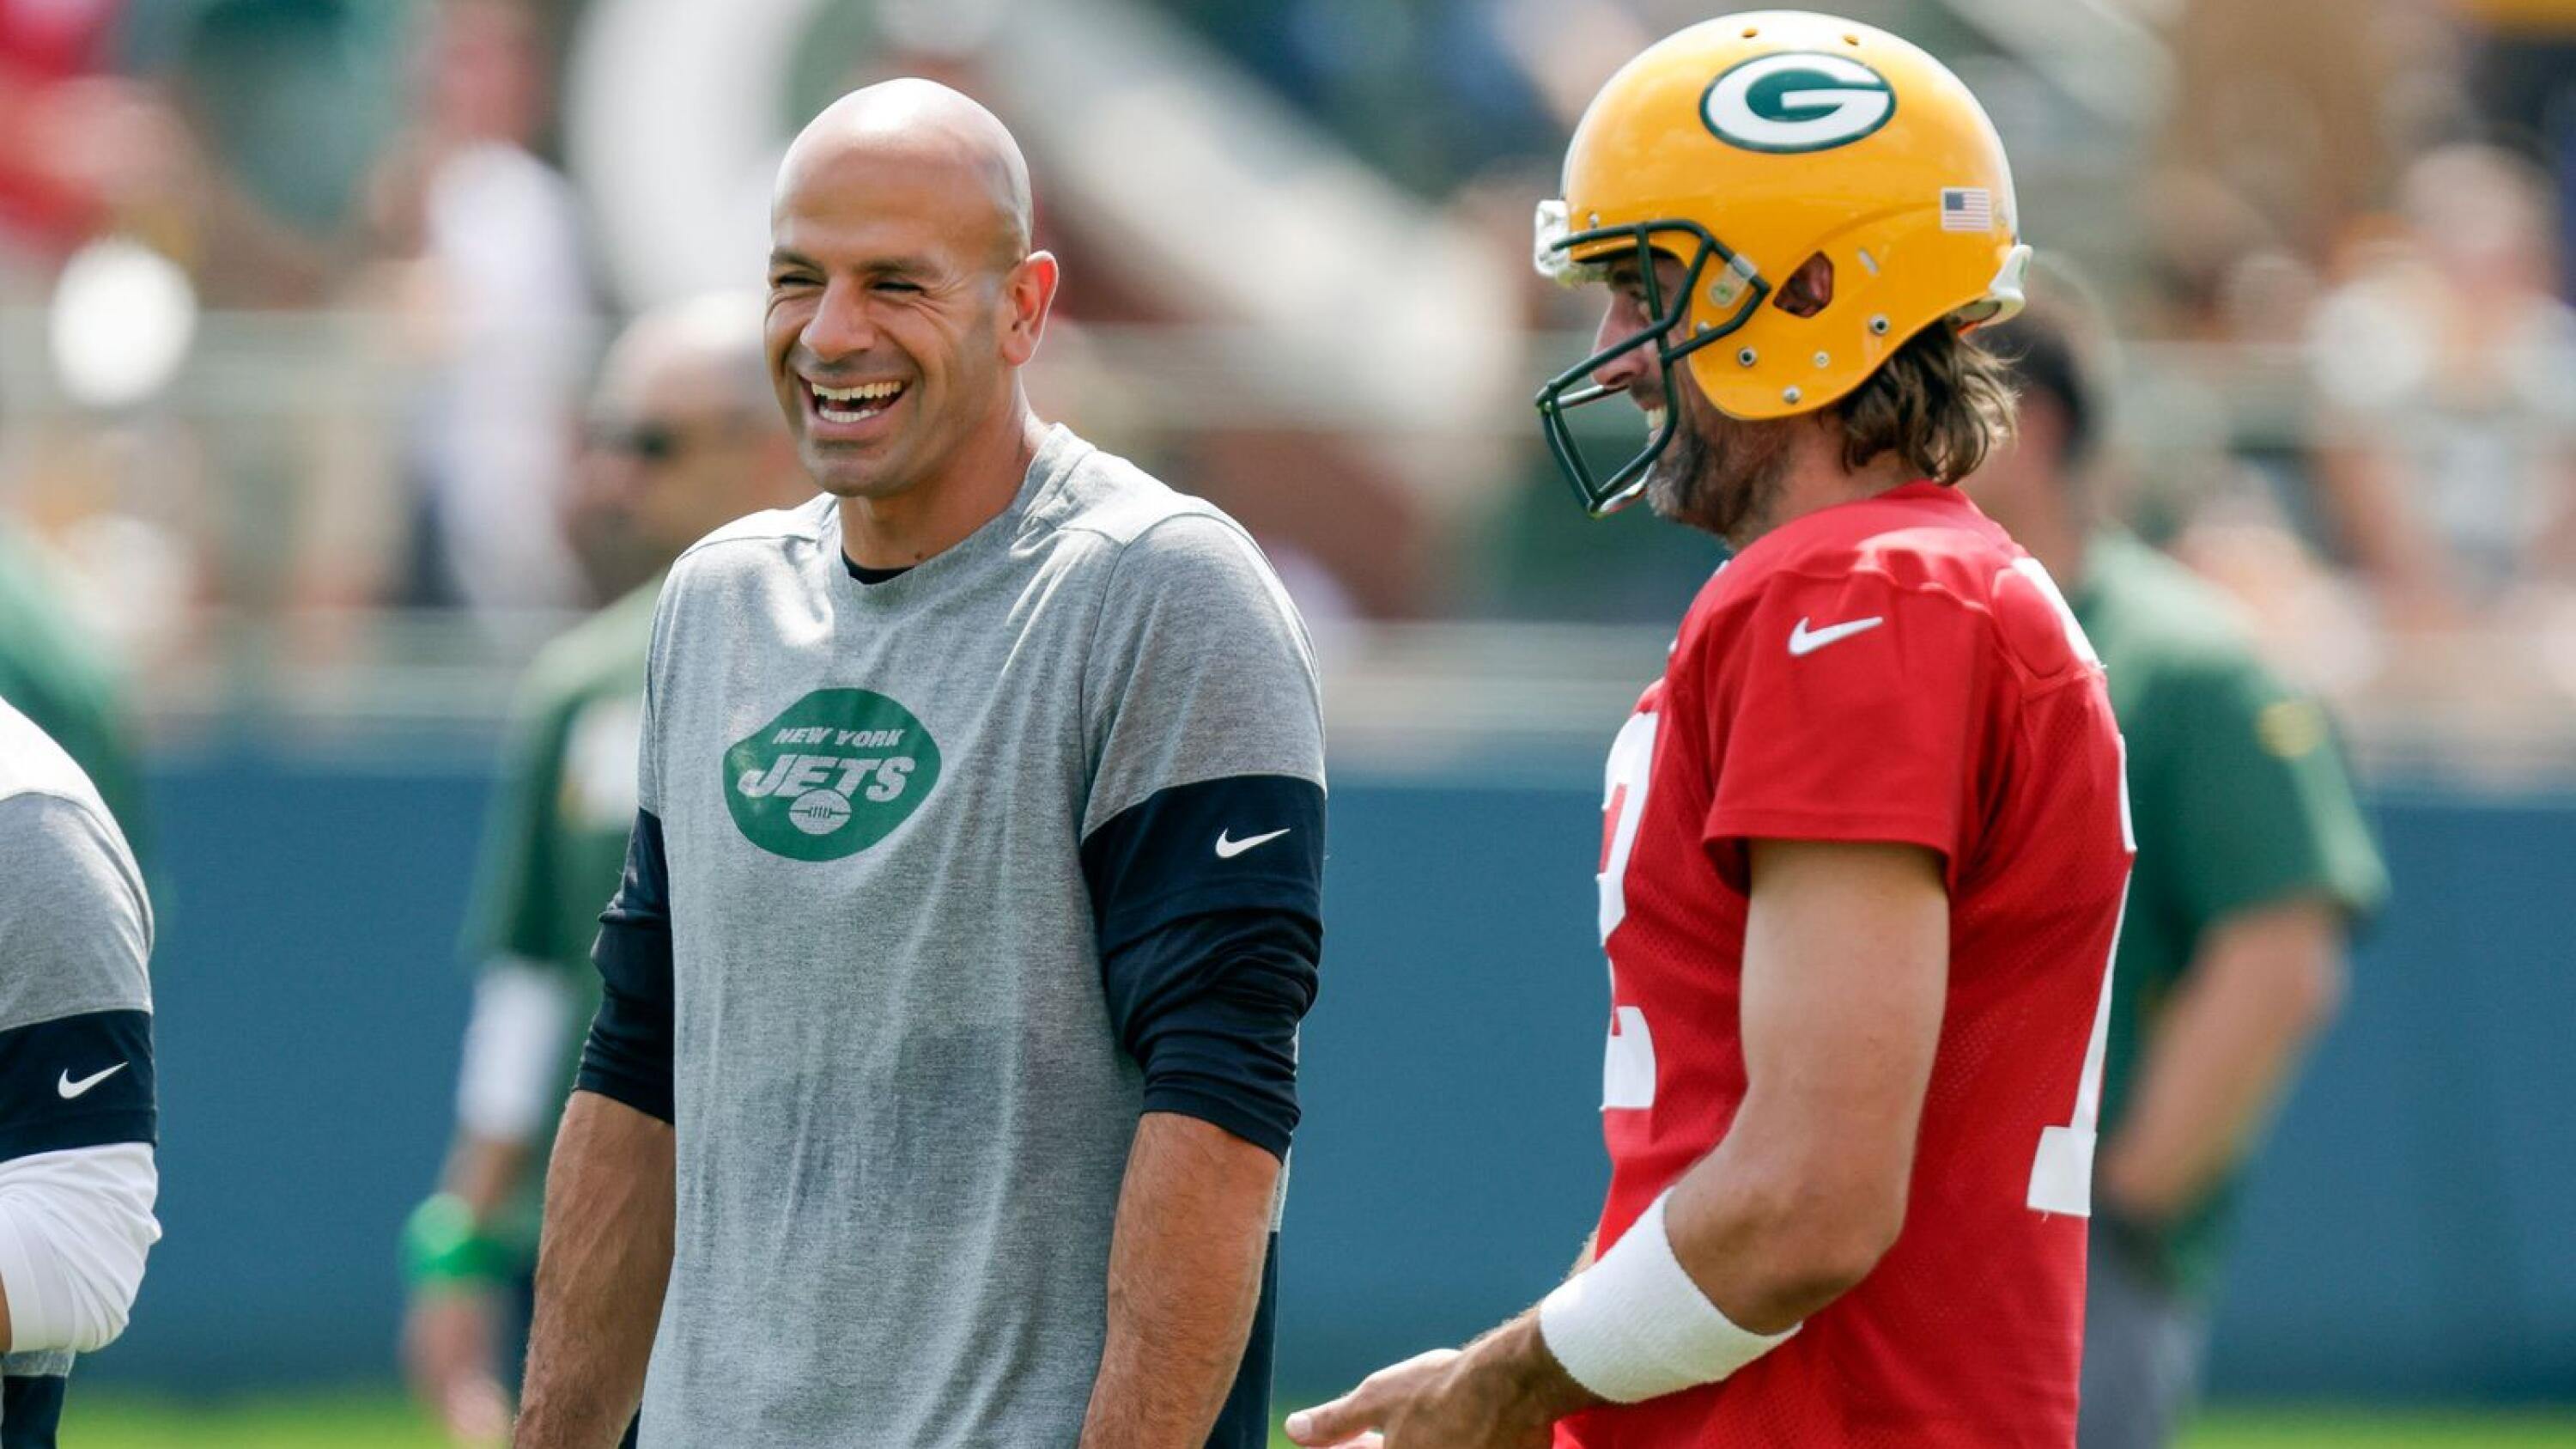 Rodgers plans to play for Jets in 2023, awaits Packers' move